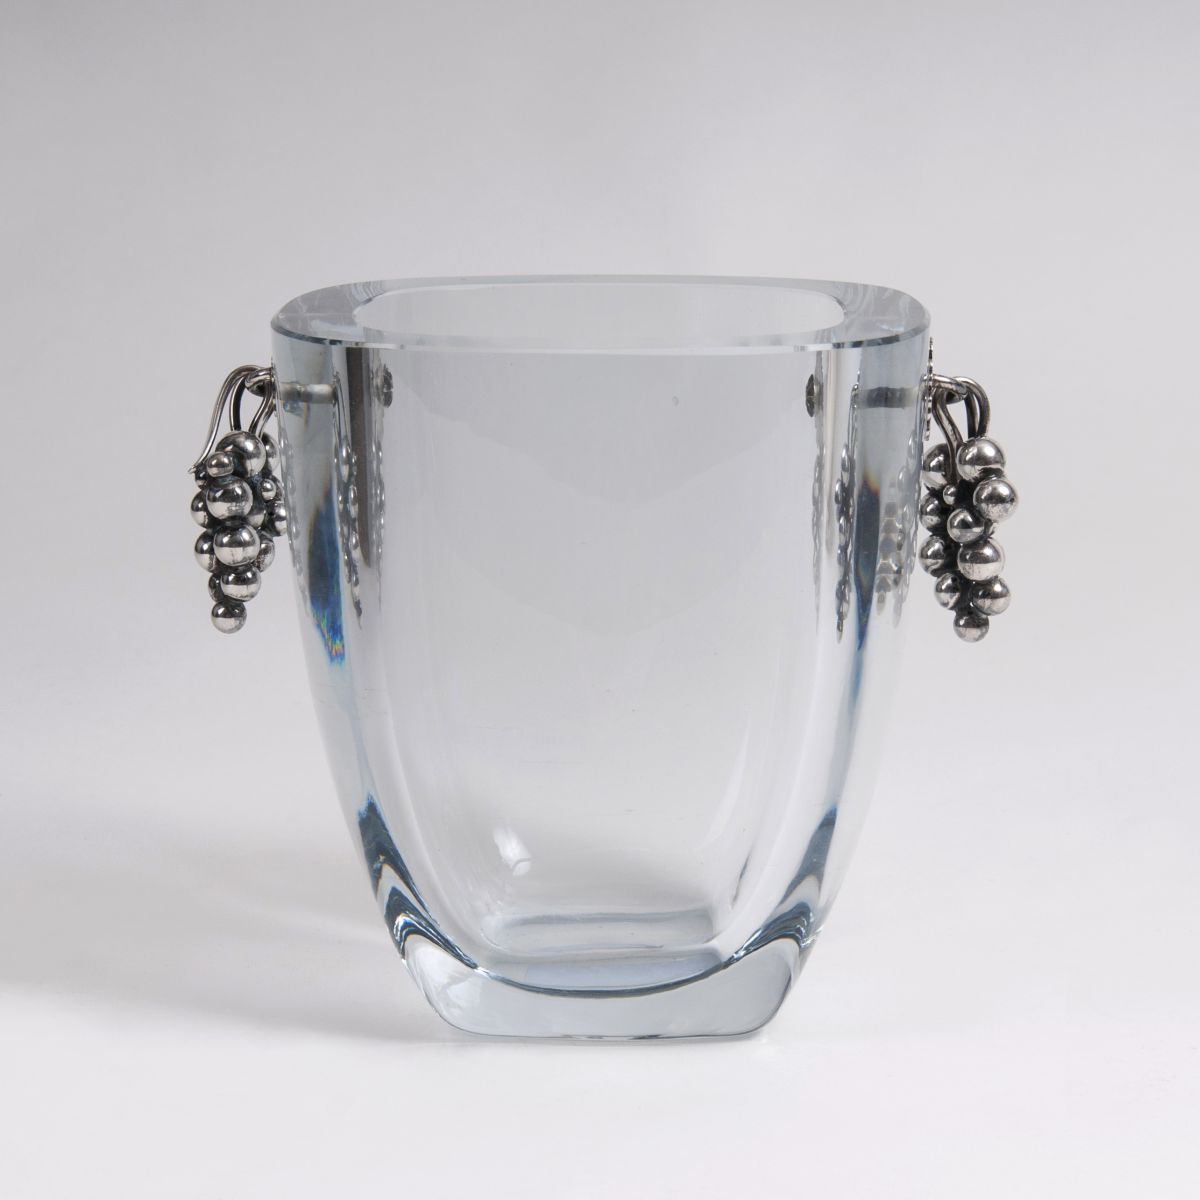 An elegant ice bucket with silver grapes